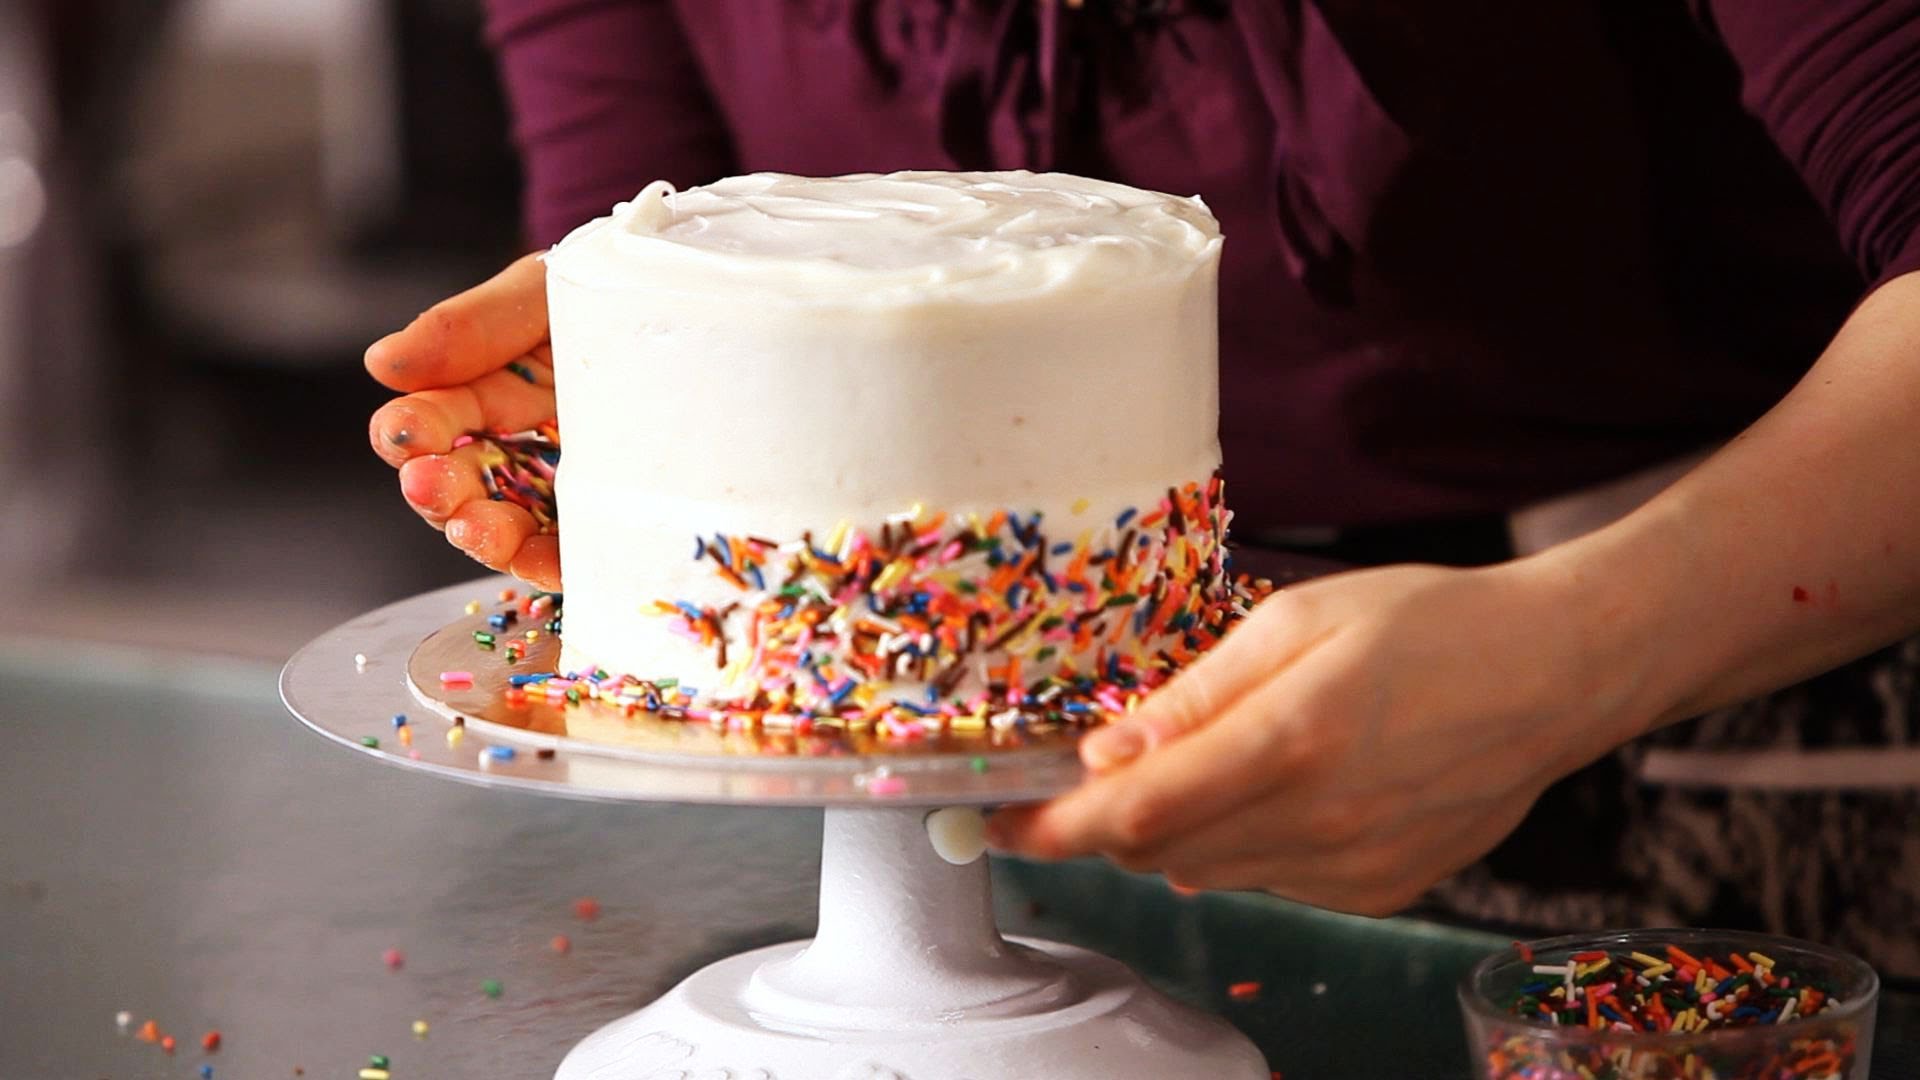 How to Decorate Cakes with Sprinkles